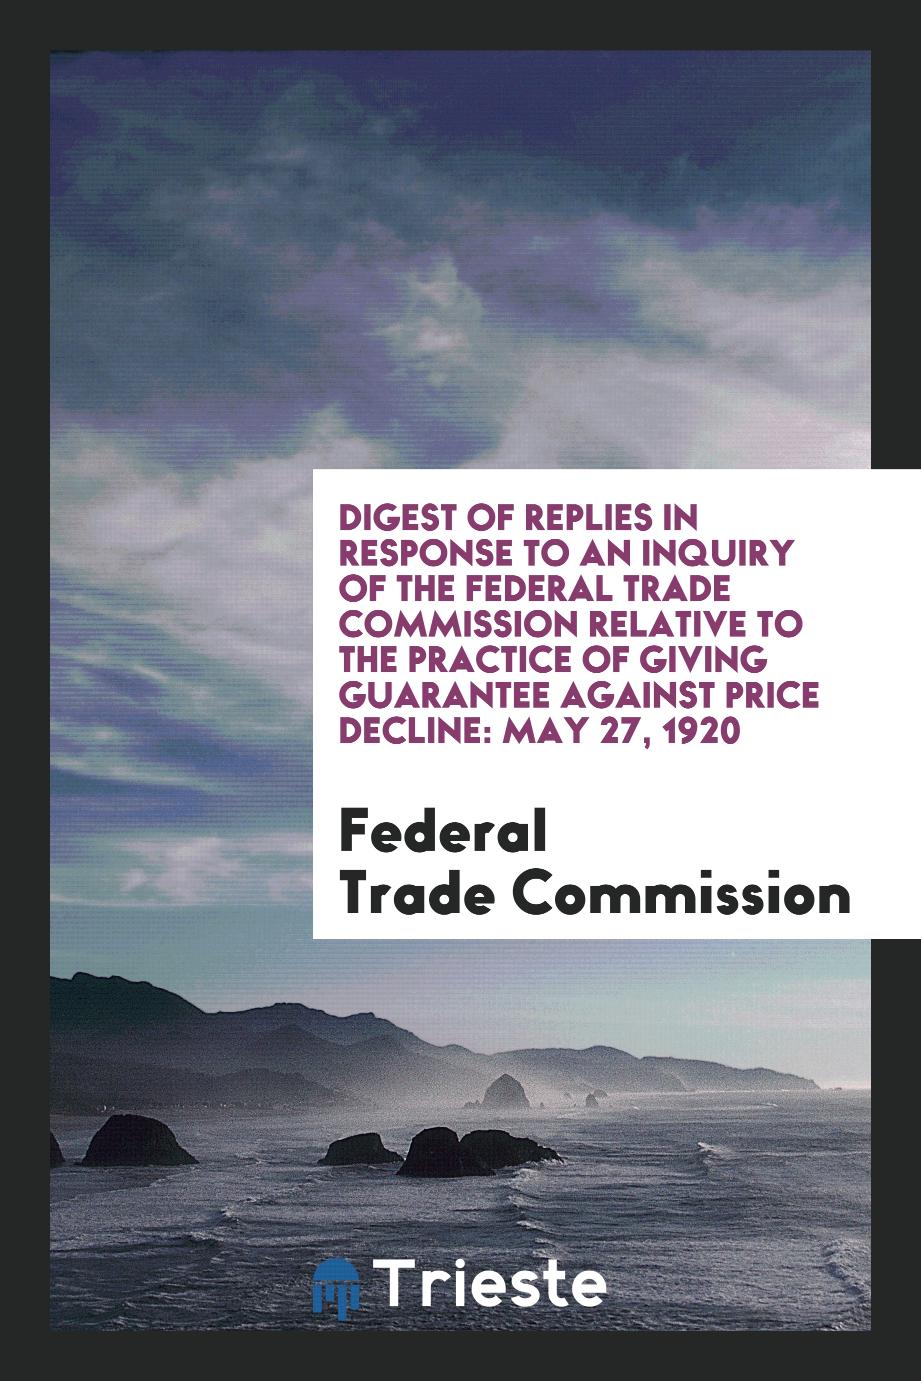 Digest of Replies in Response to an Inquiry of the Federal Trade Commission Relative to the Practice of Giving Guarantee Against Price Decline: May 27, 1920